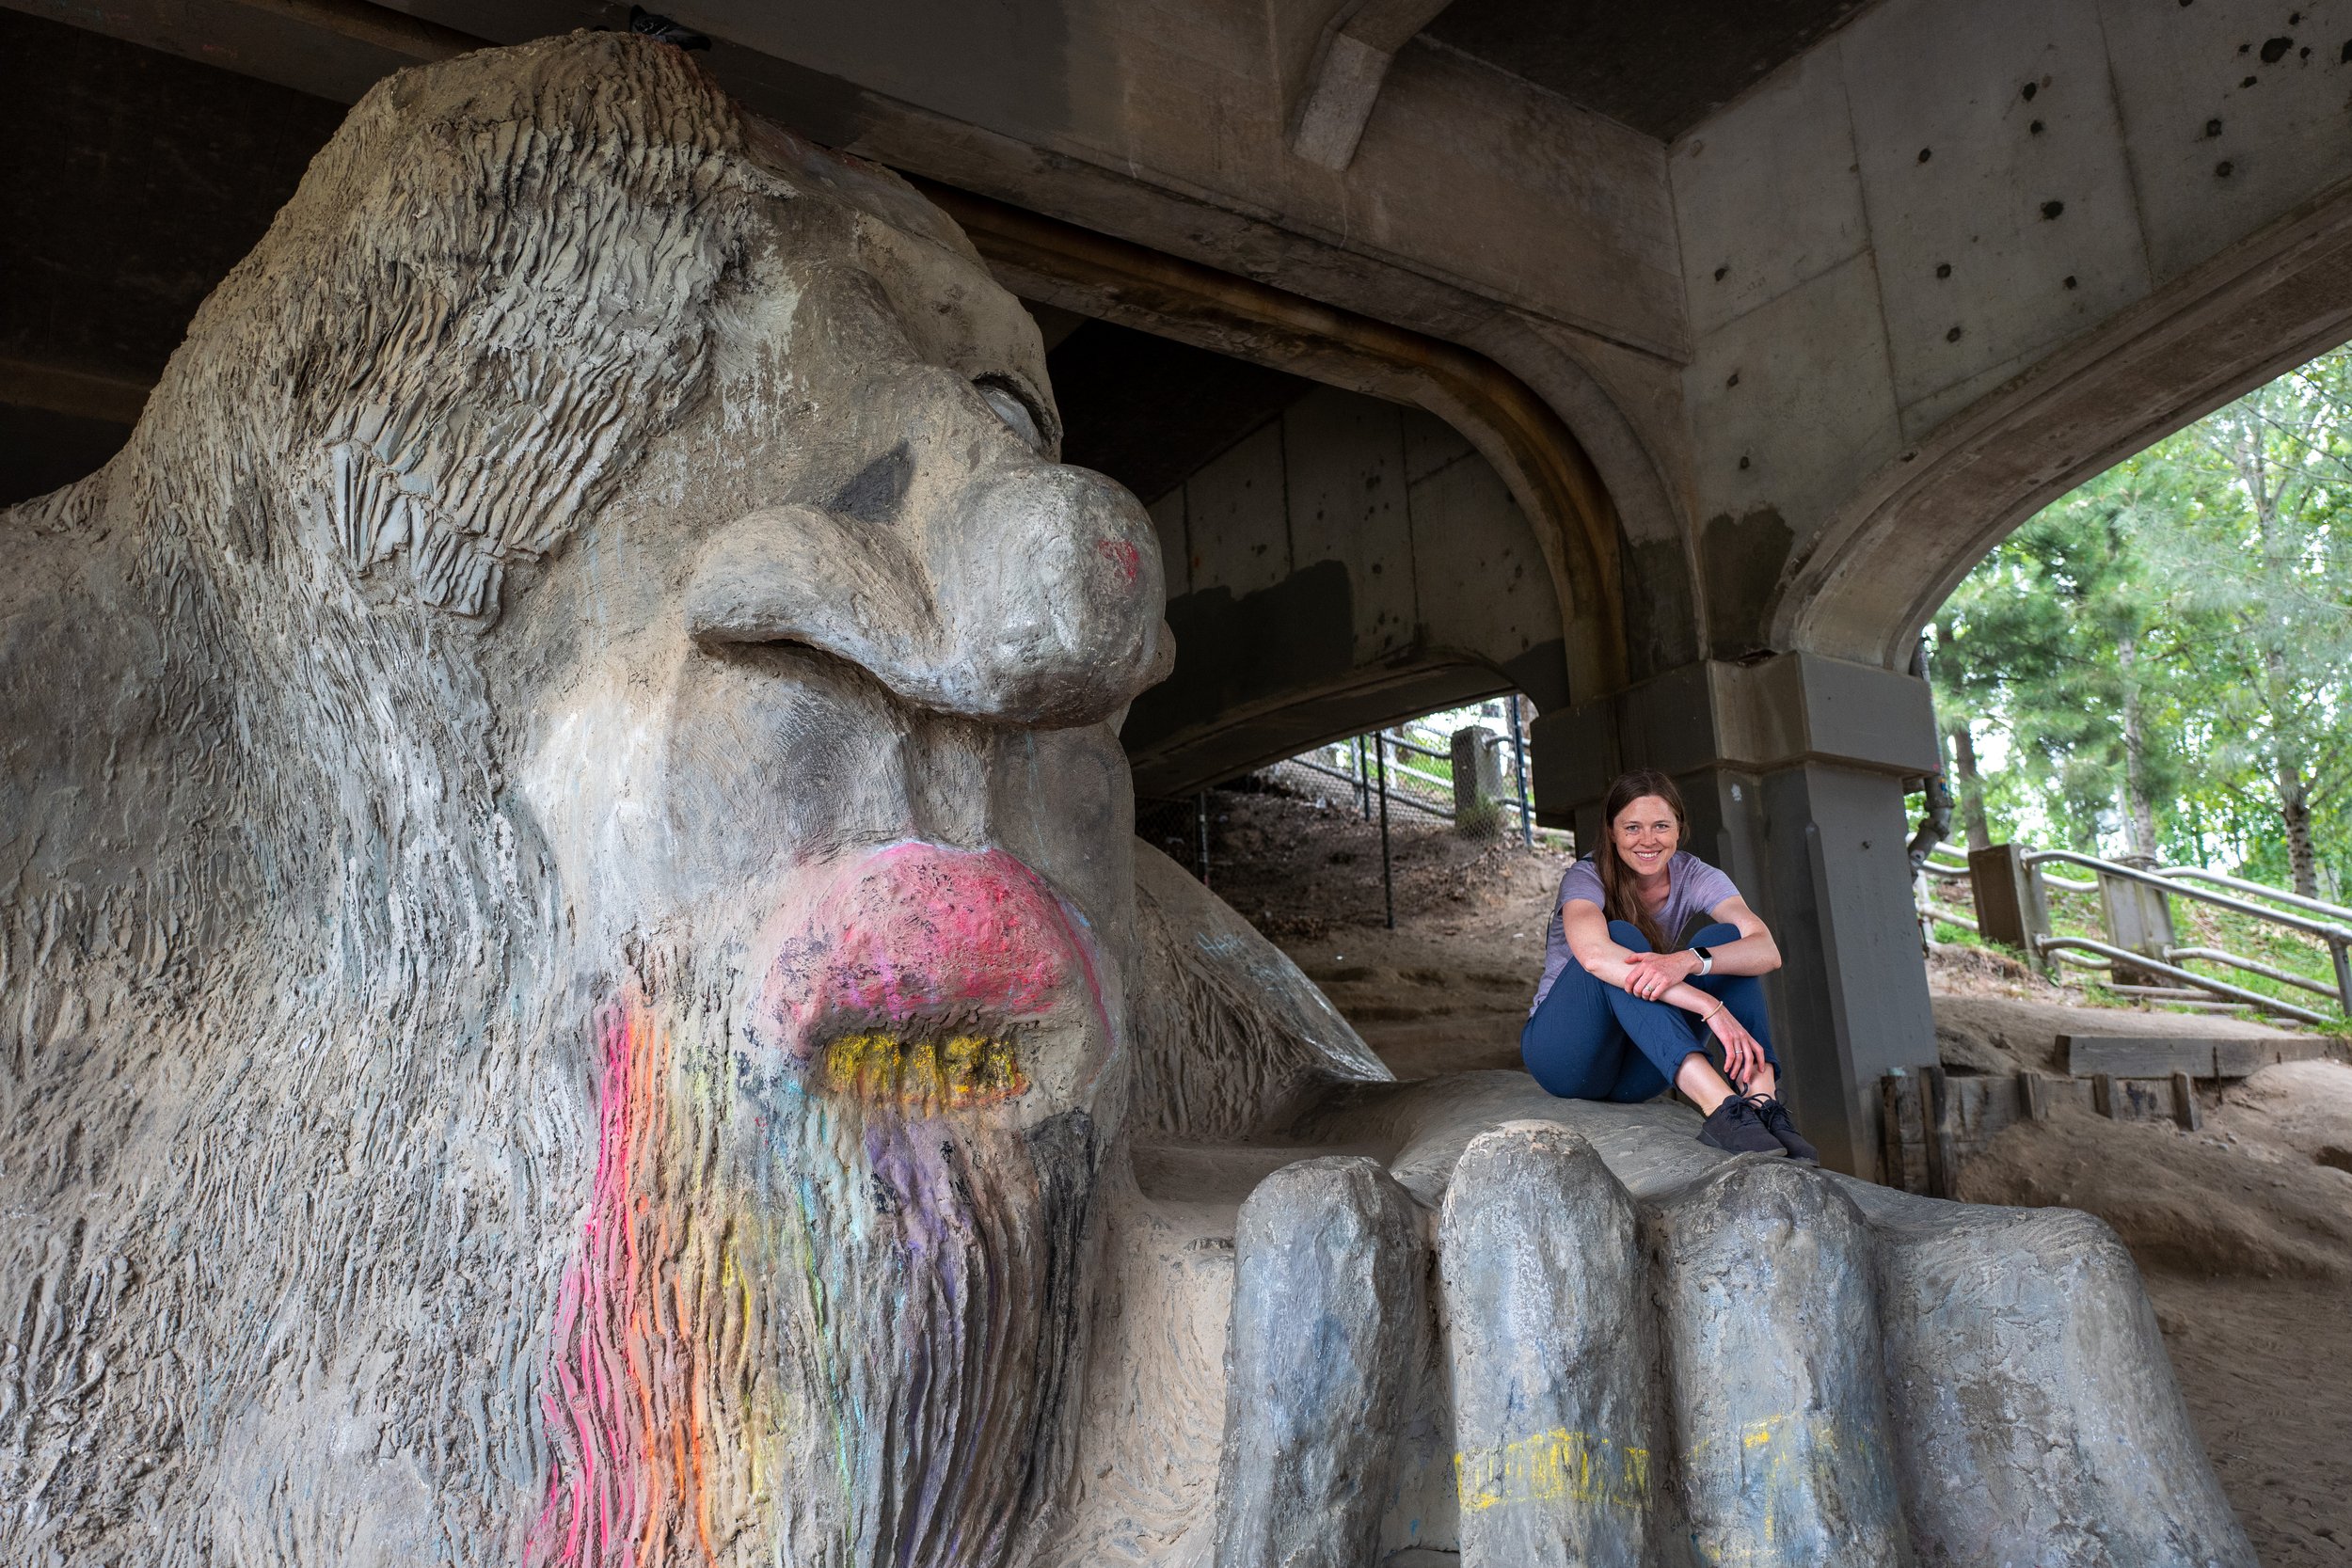  Nicole with the Fremont Troll in our new neighborhood 